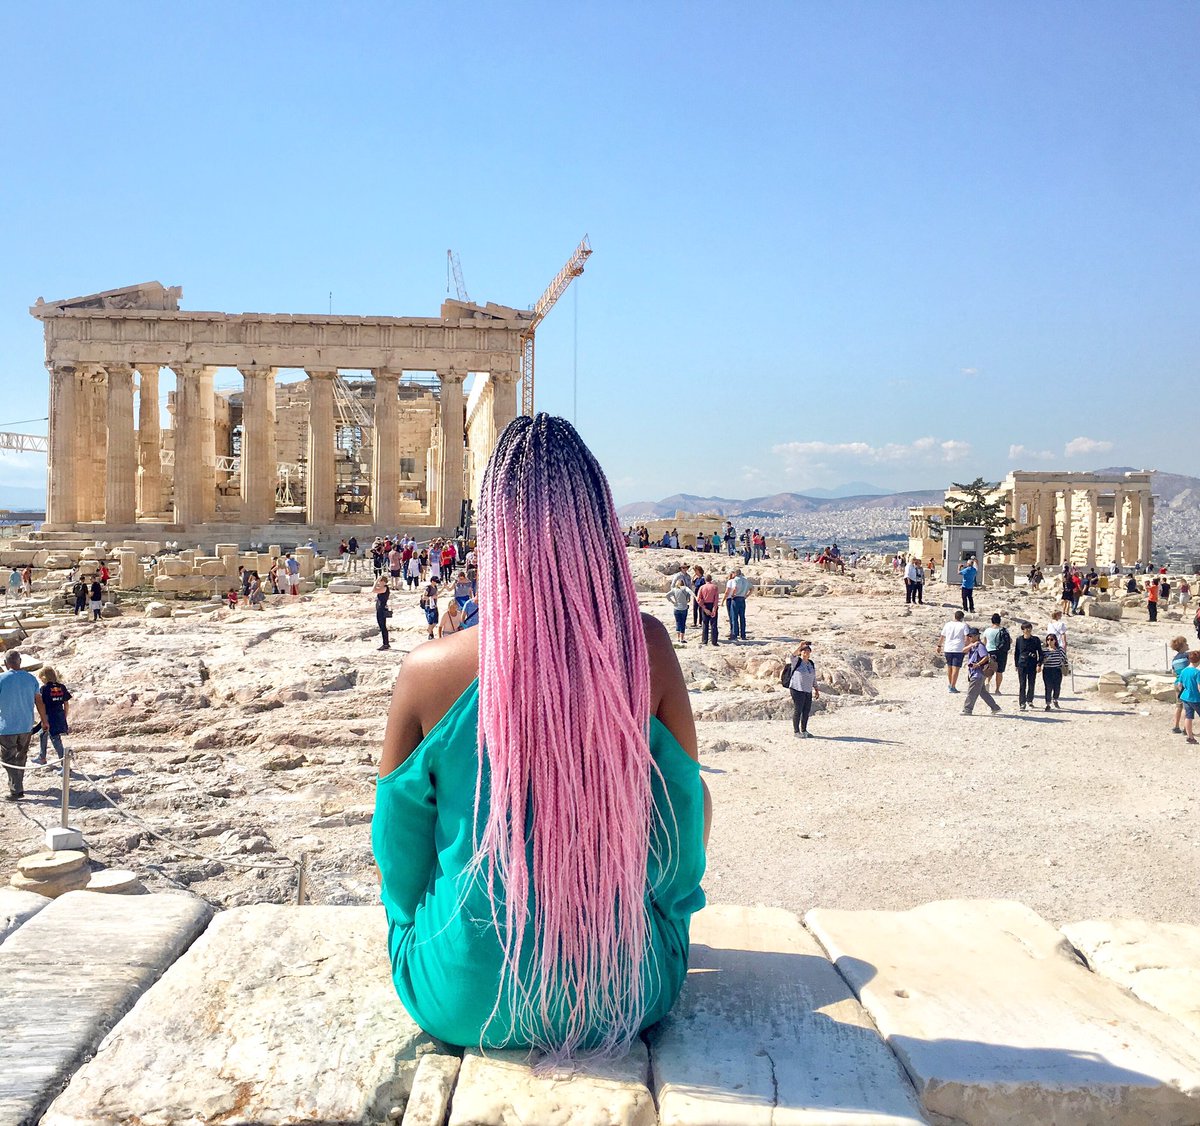 In Athens, visit Acropolis of AthensThese are among the most famous historical buildings in Greece